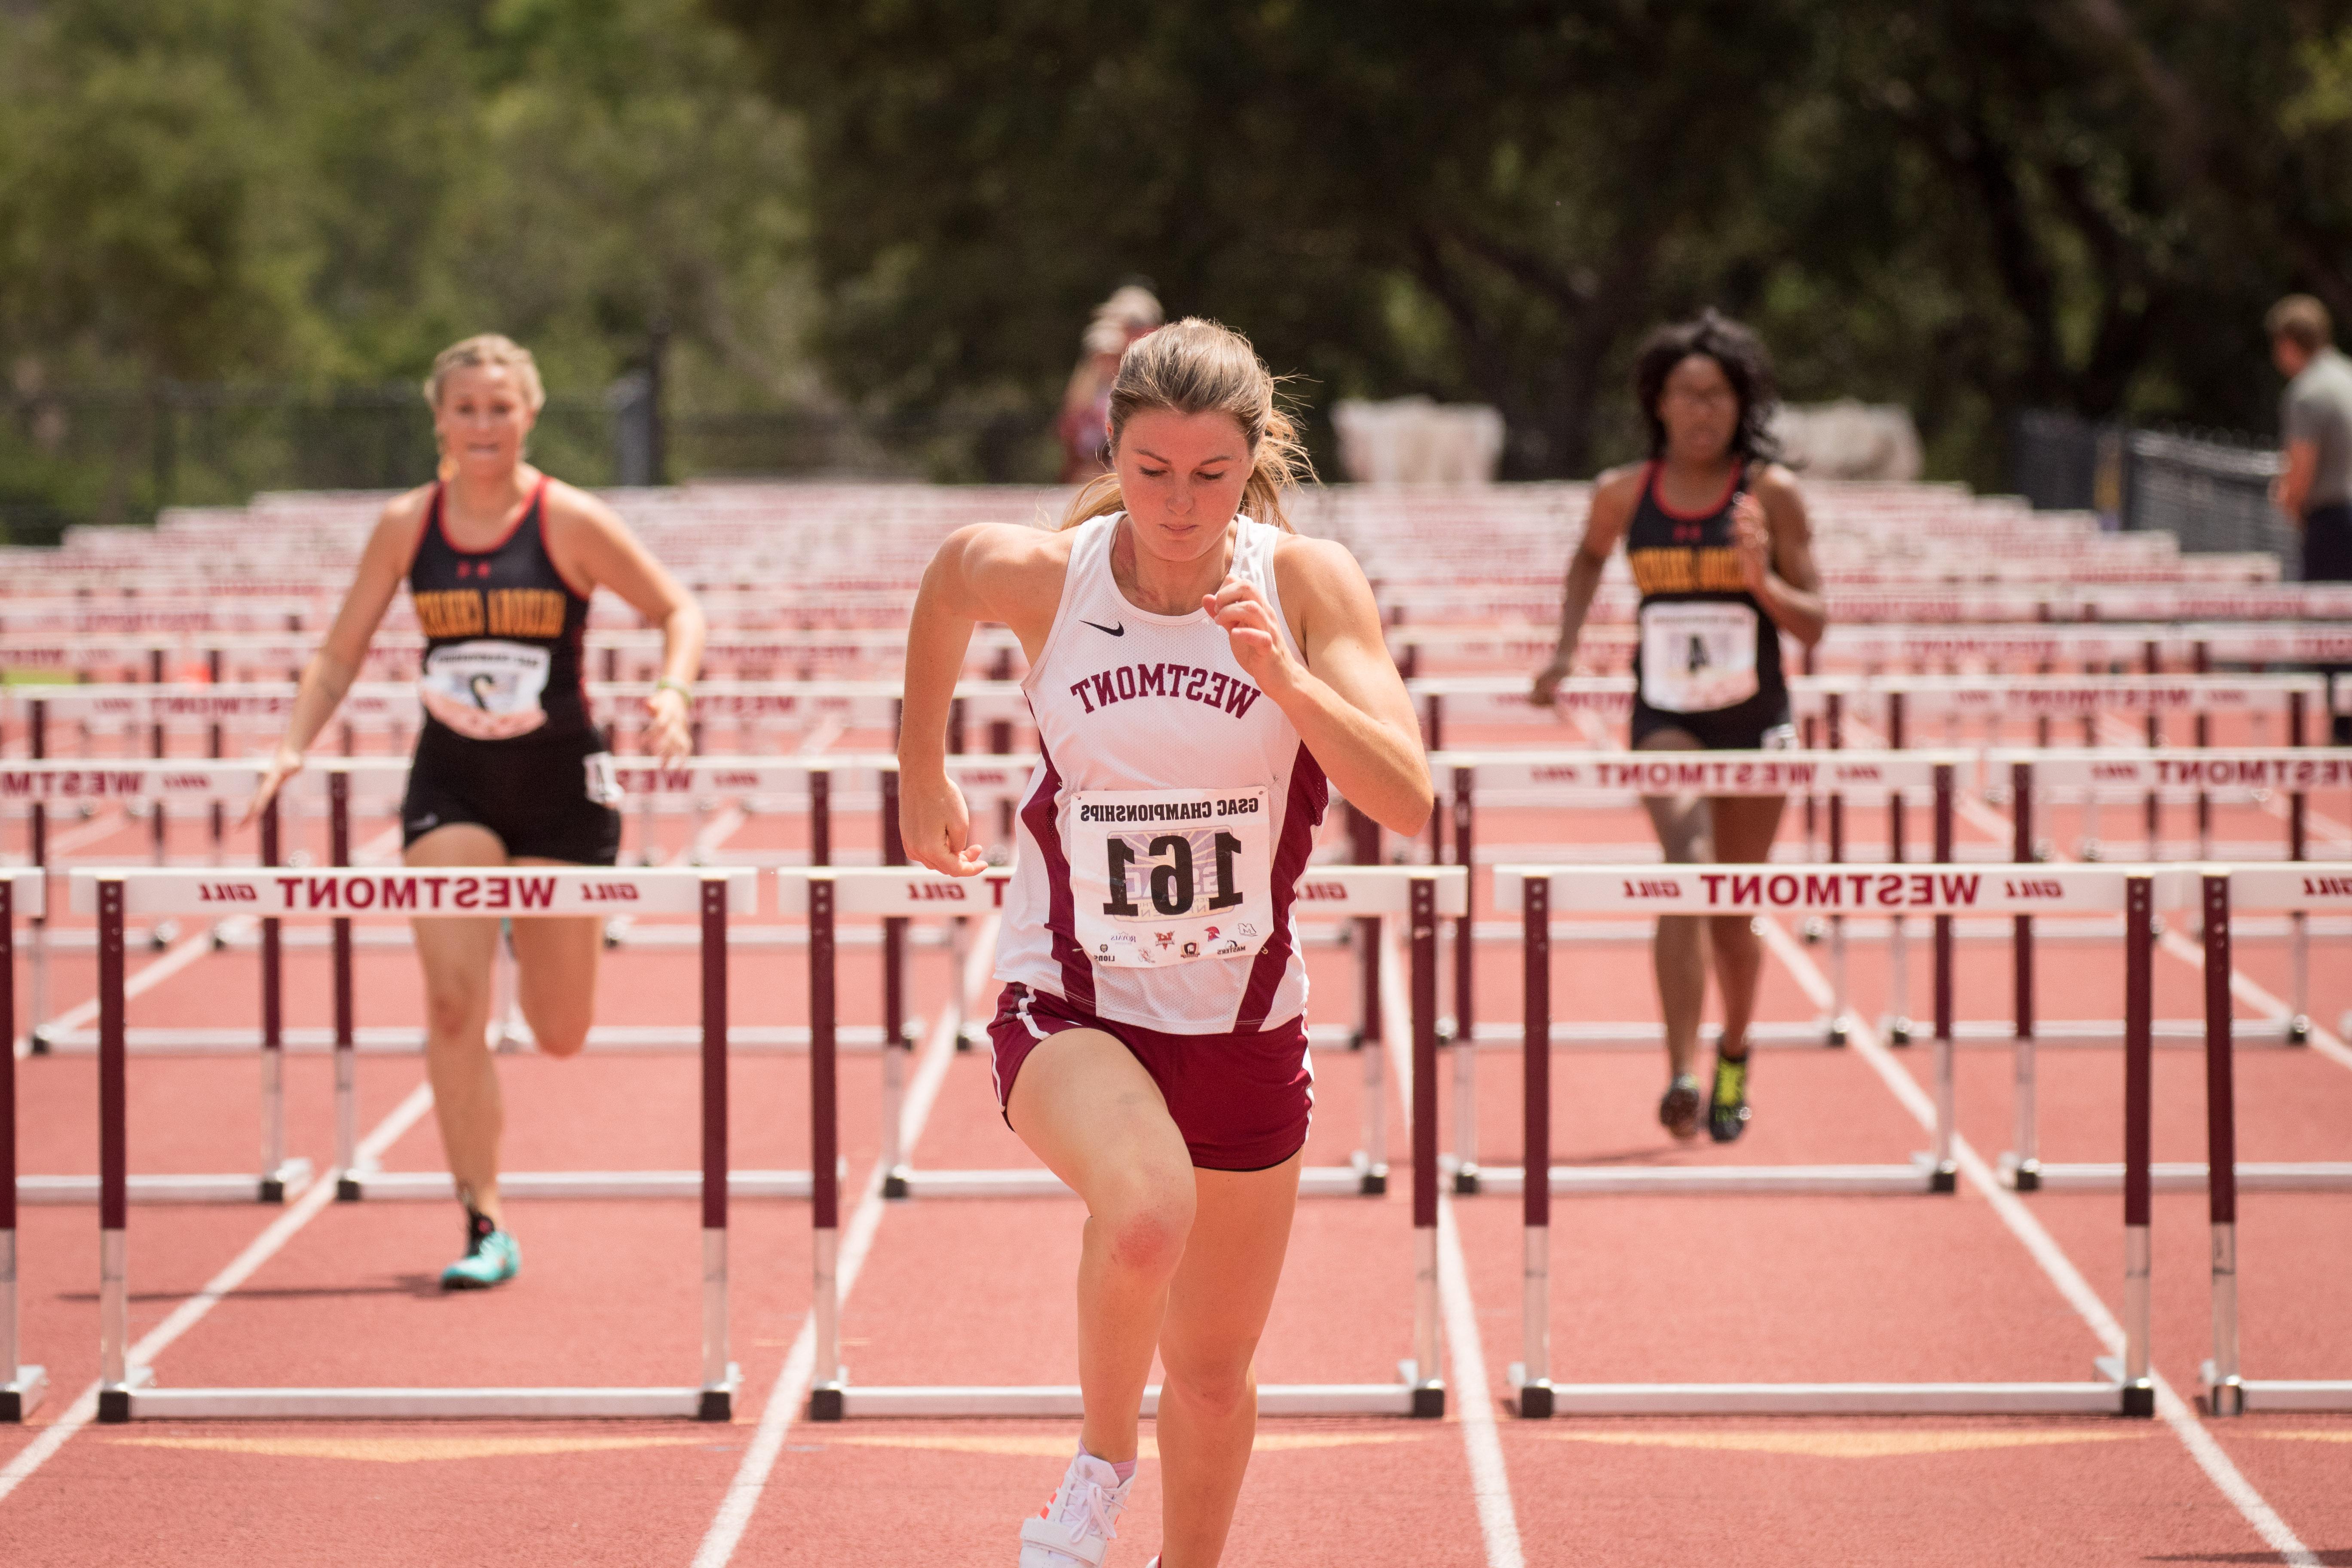 Student in the lead in a hurdle track race